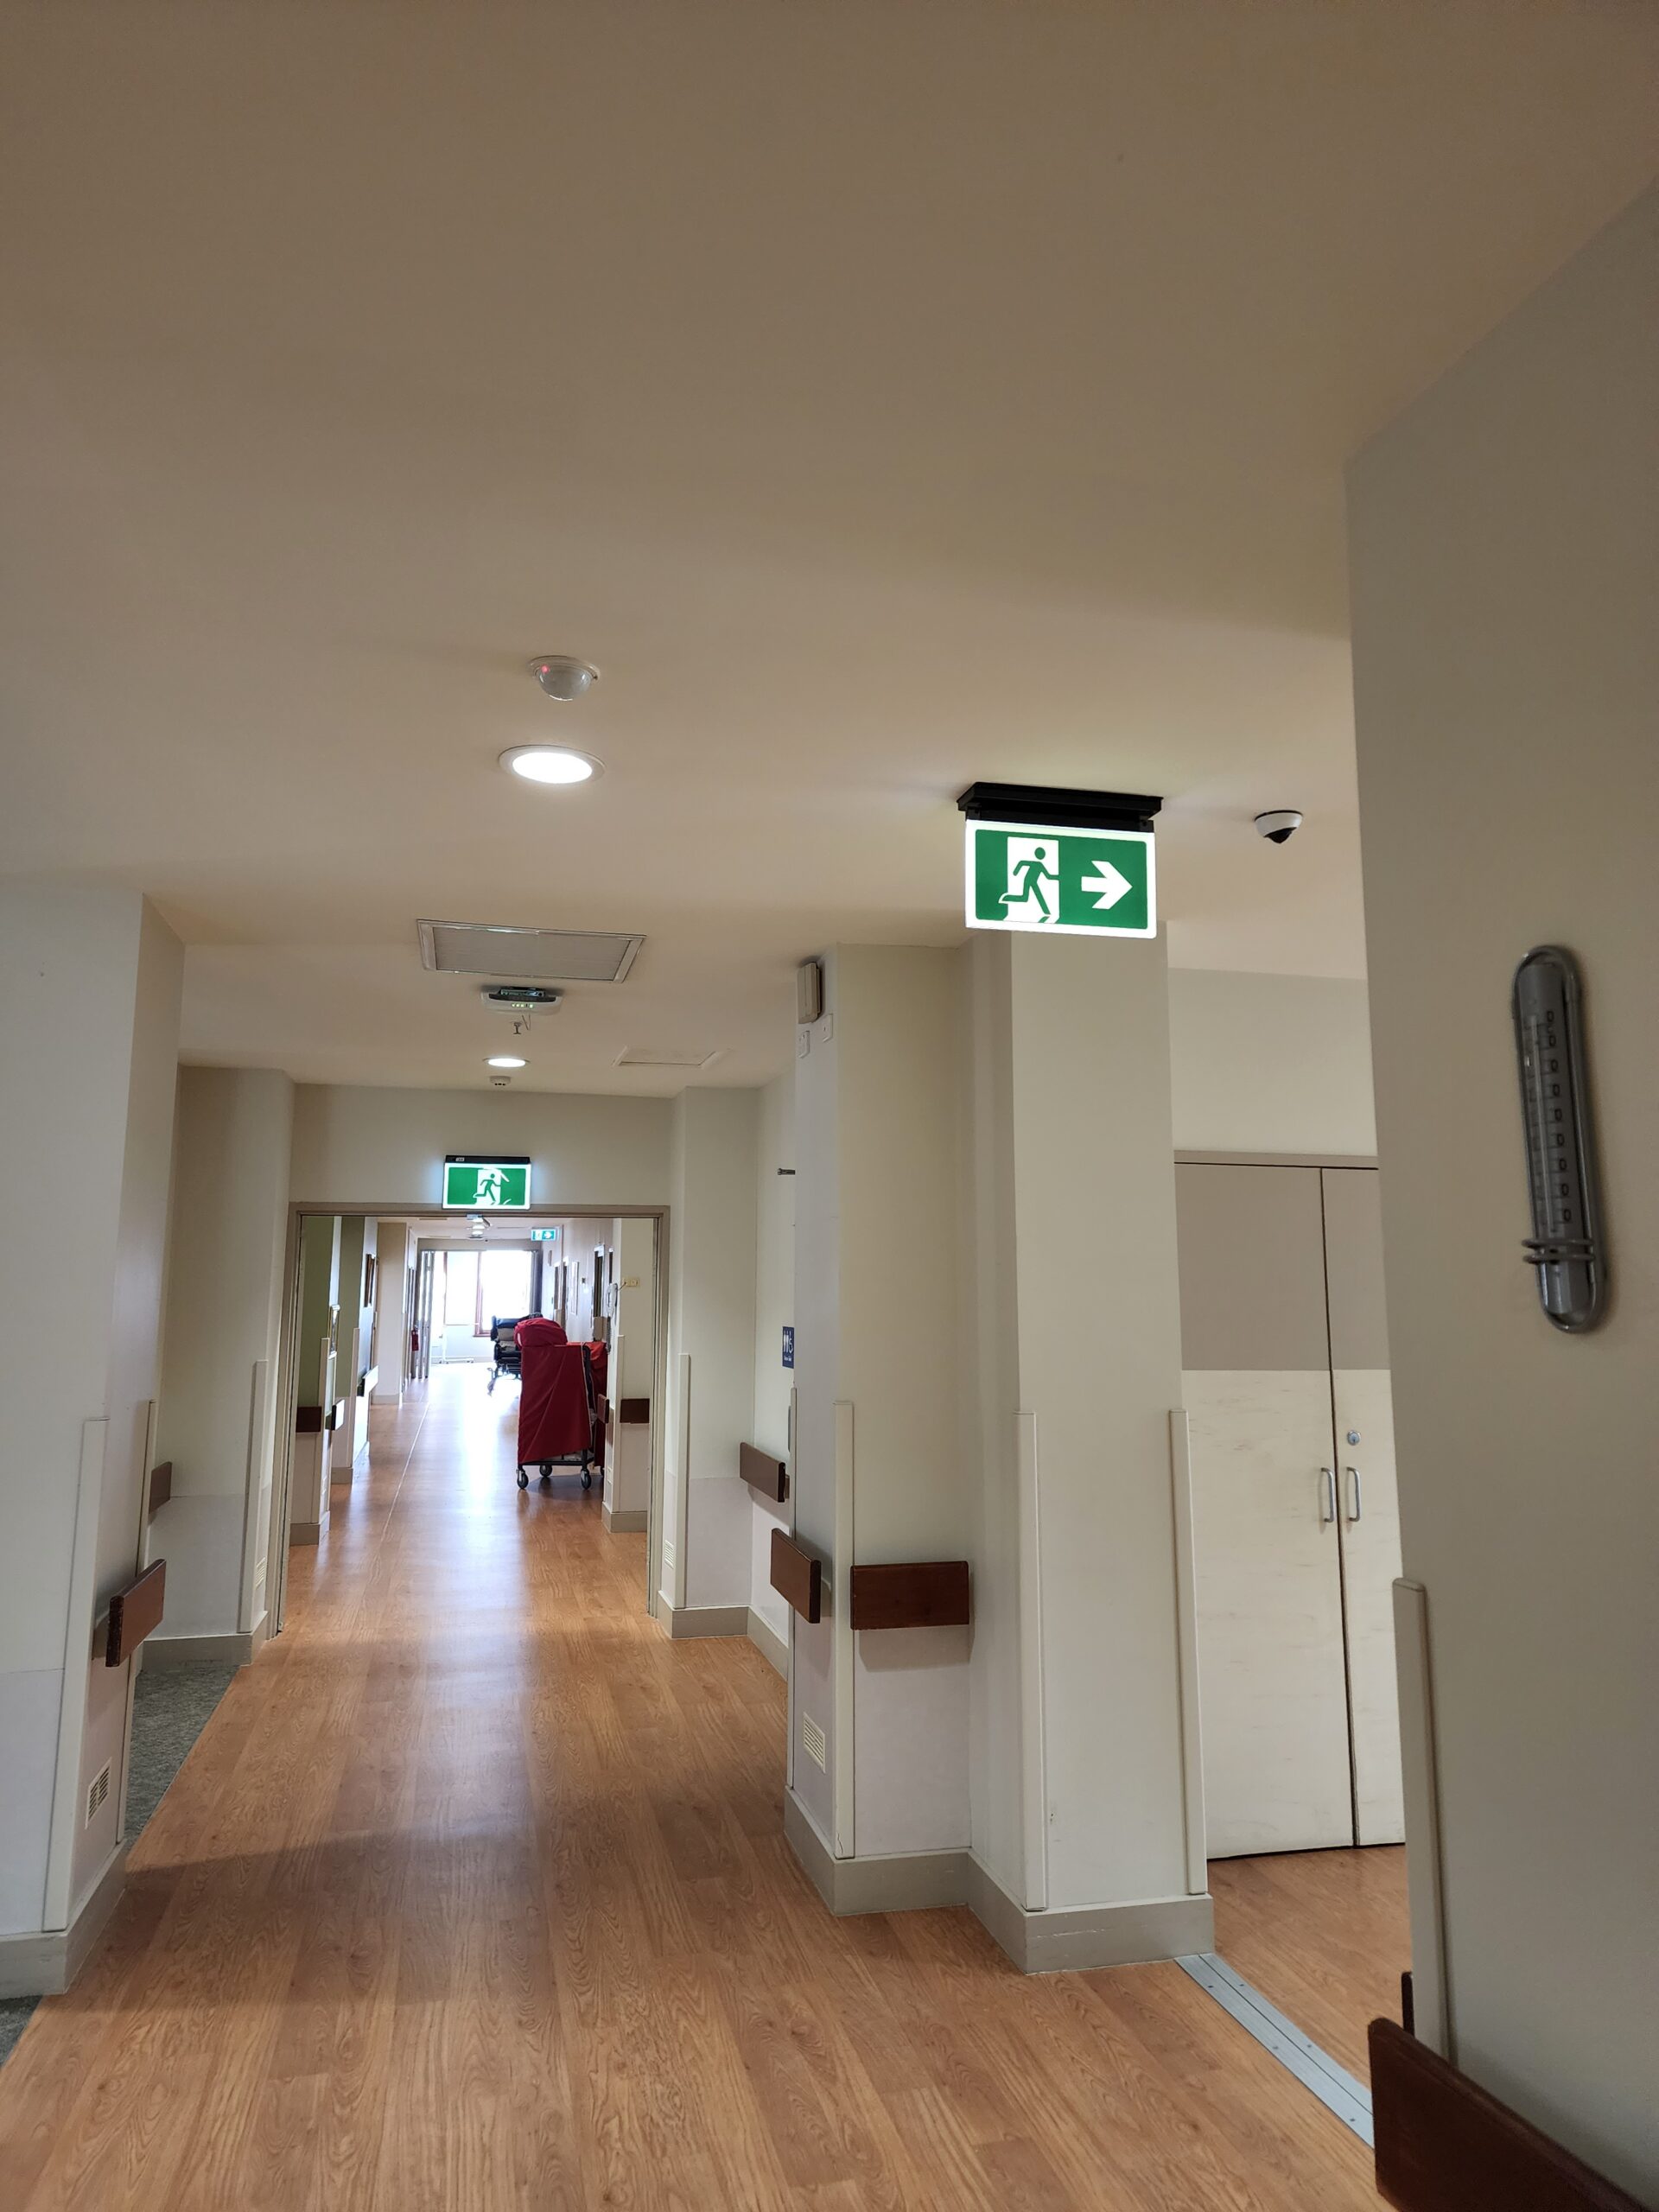 Assisi Aged Care Smarterlite Hyperion Exit Sign